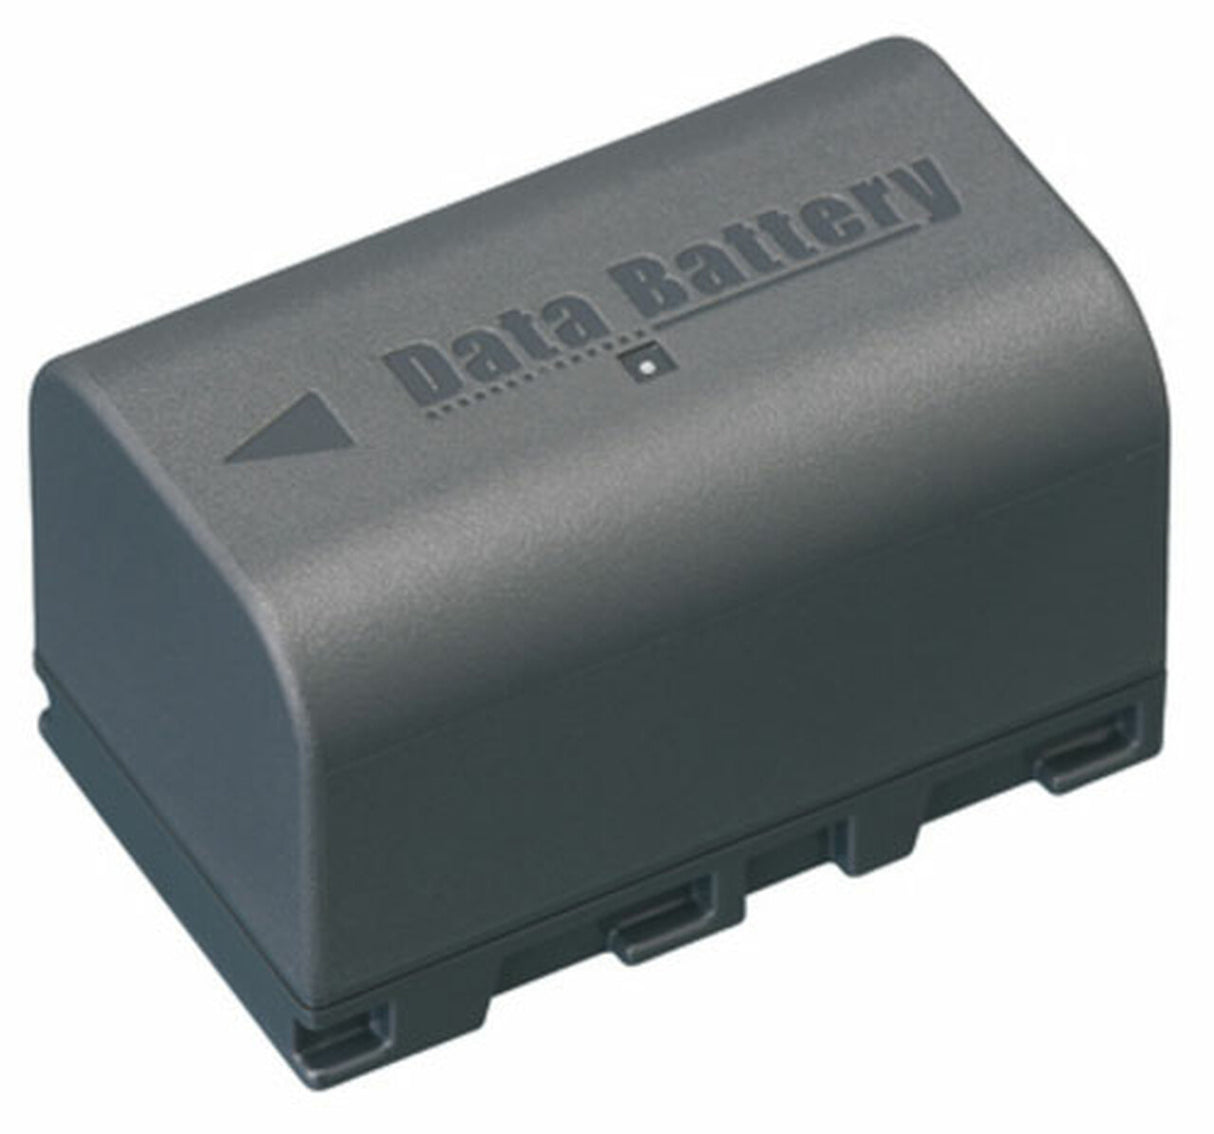 Battery For JVC GZ-HD300 Handycam Camcorders